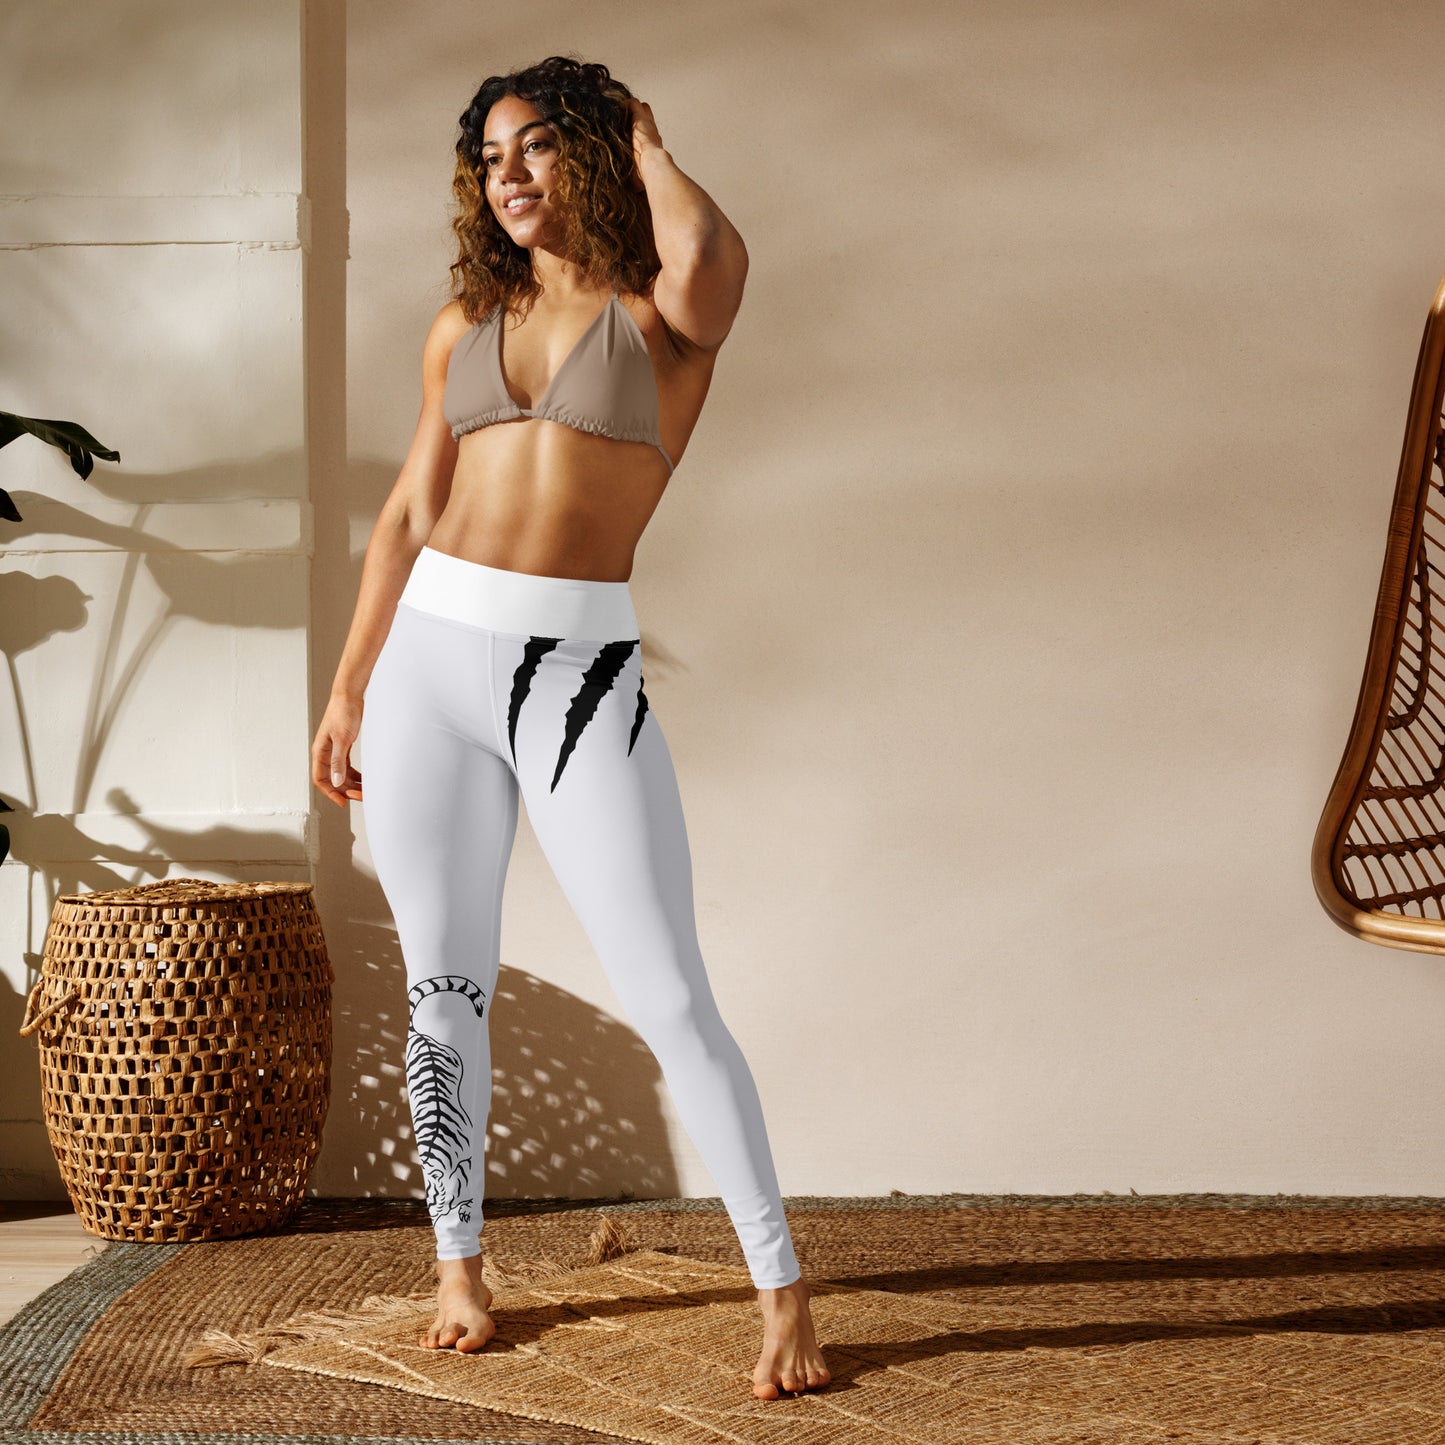 Women's Sports Leggings with Pockets, High Waist White Tiger